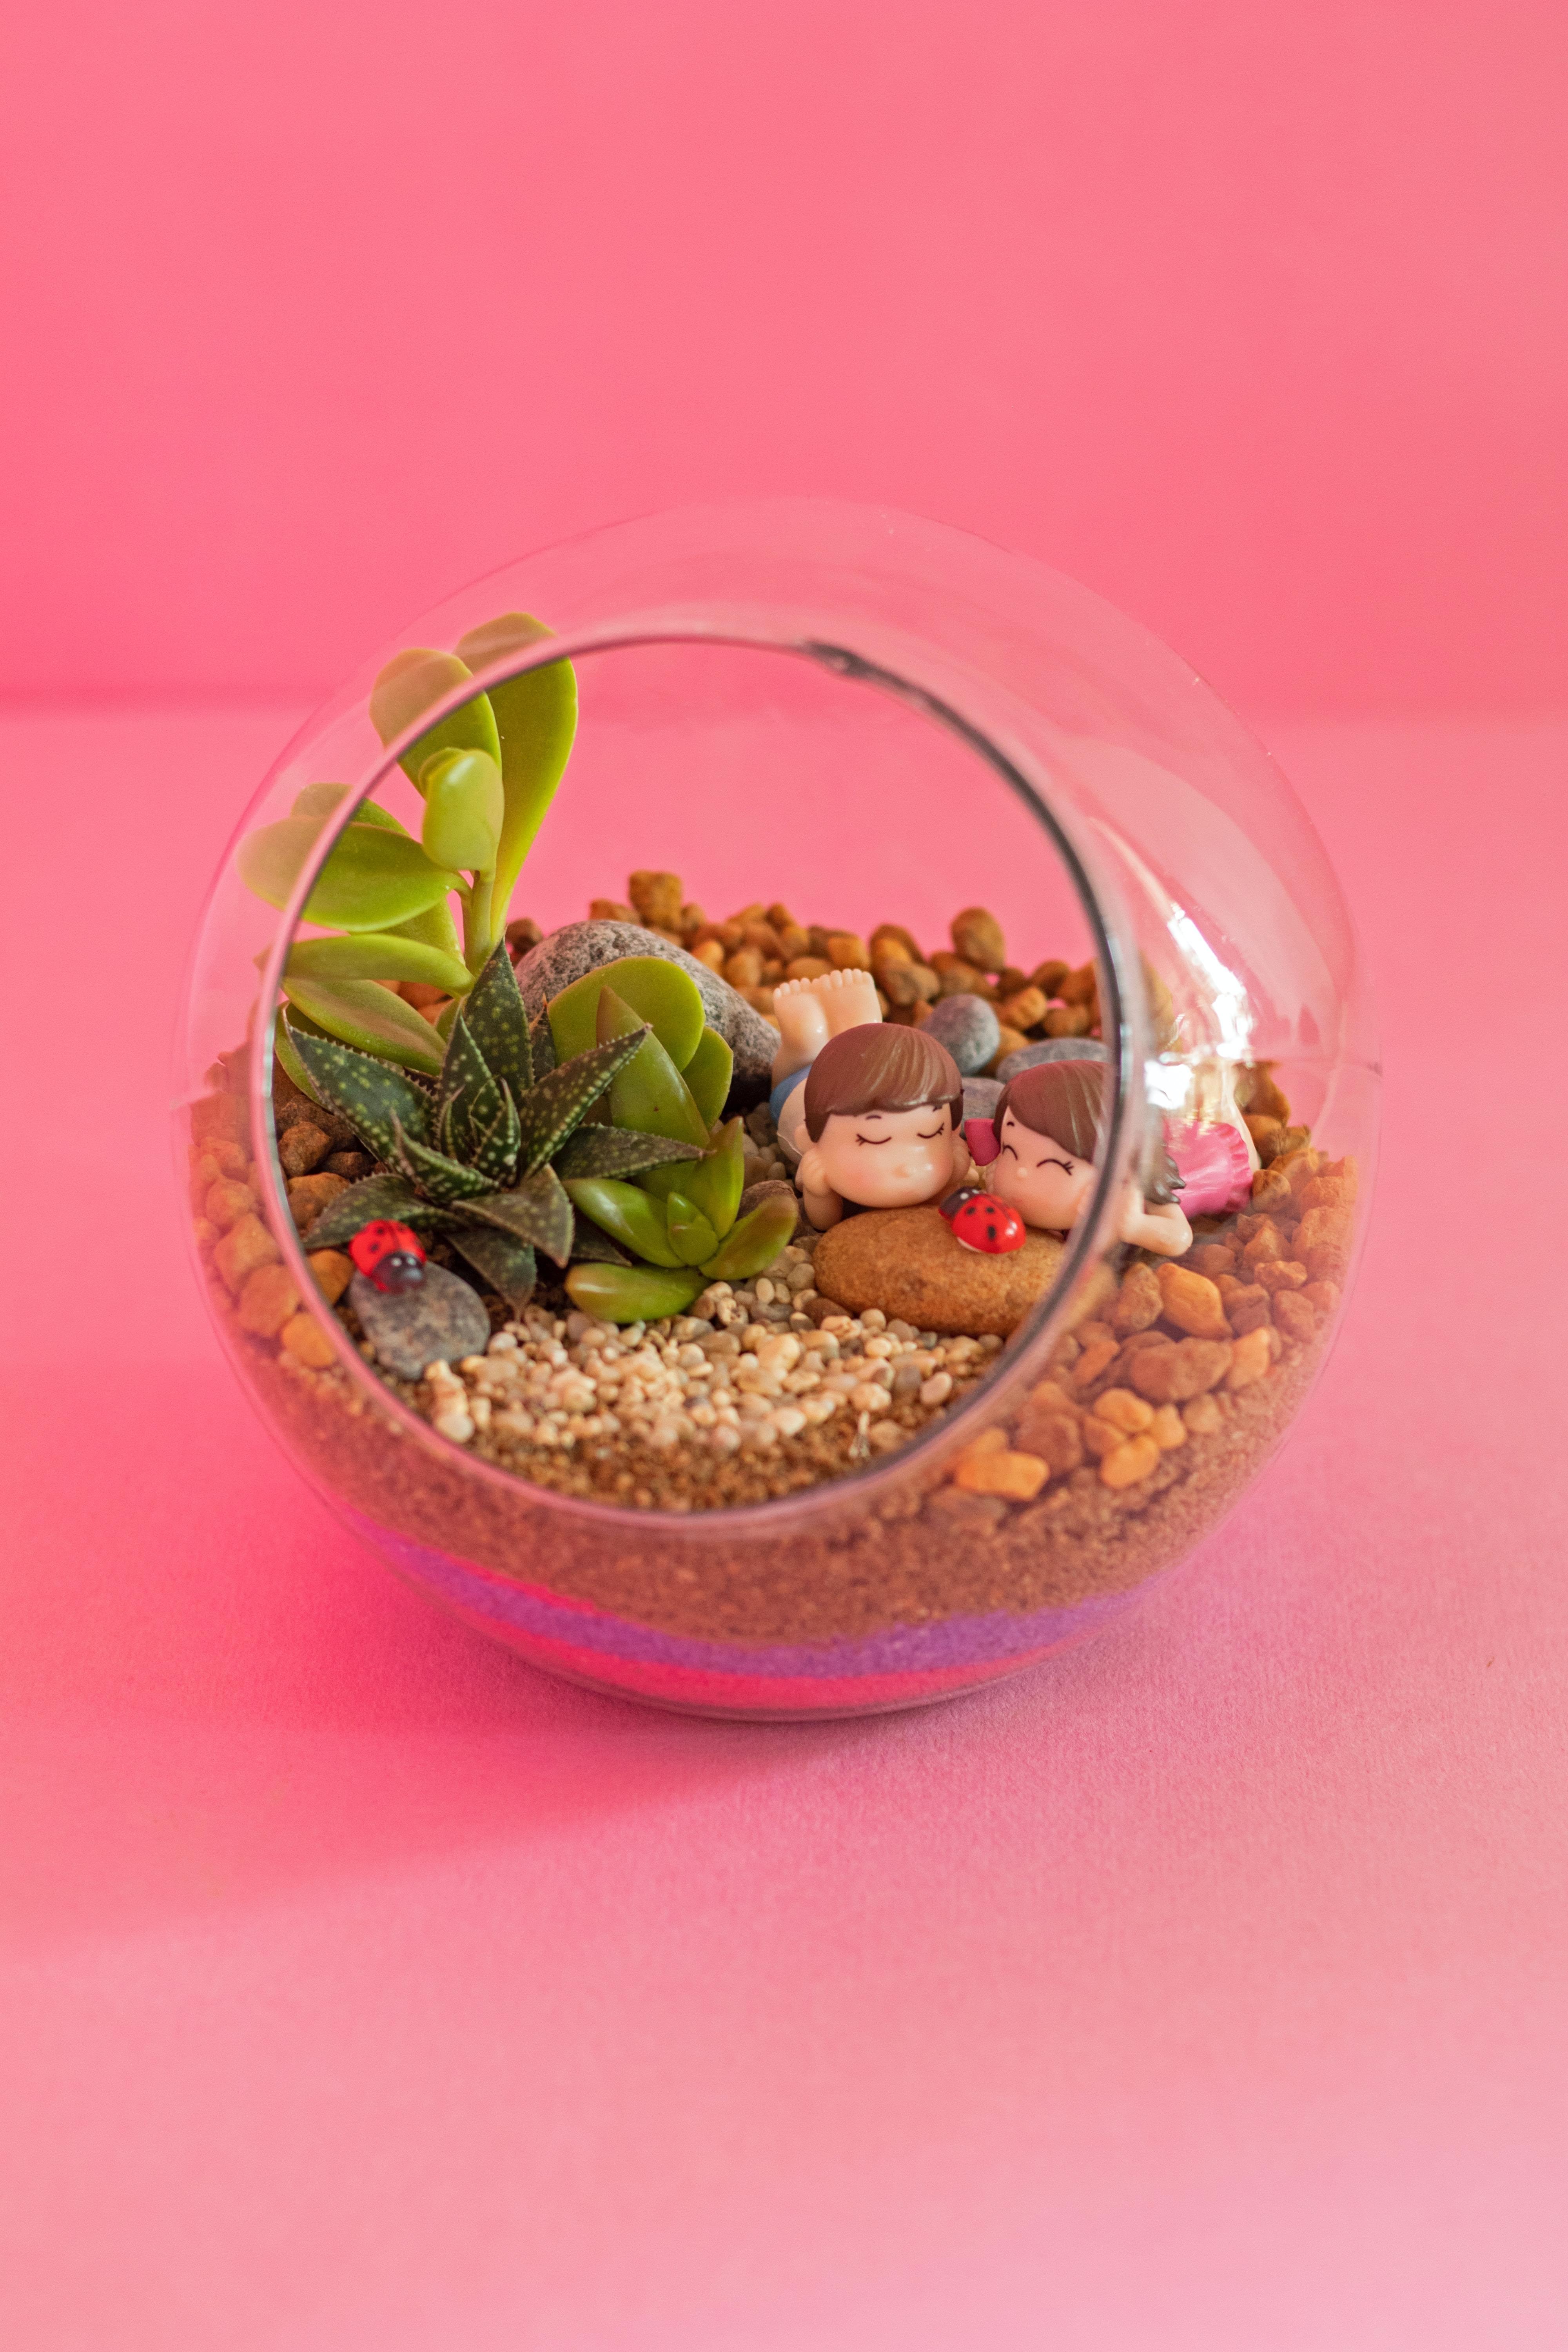 A small glass globe terrarium with gravel, small succulents, and cute dolls in front of a pink background